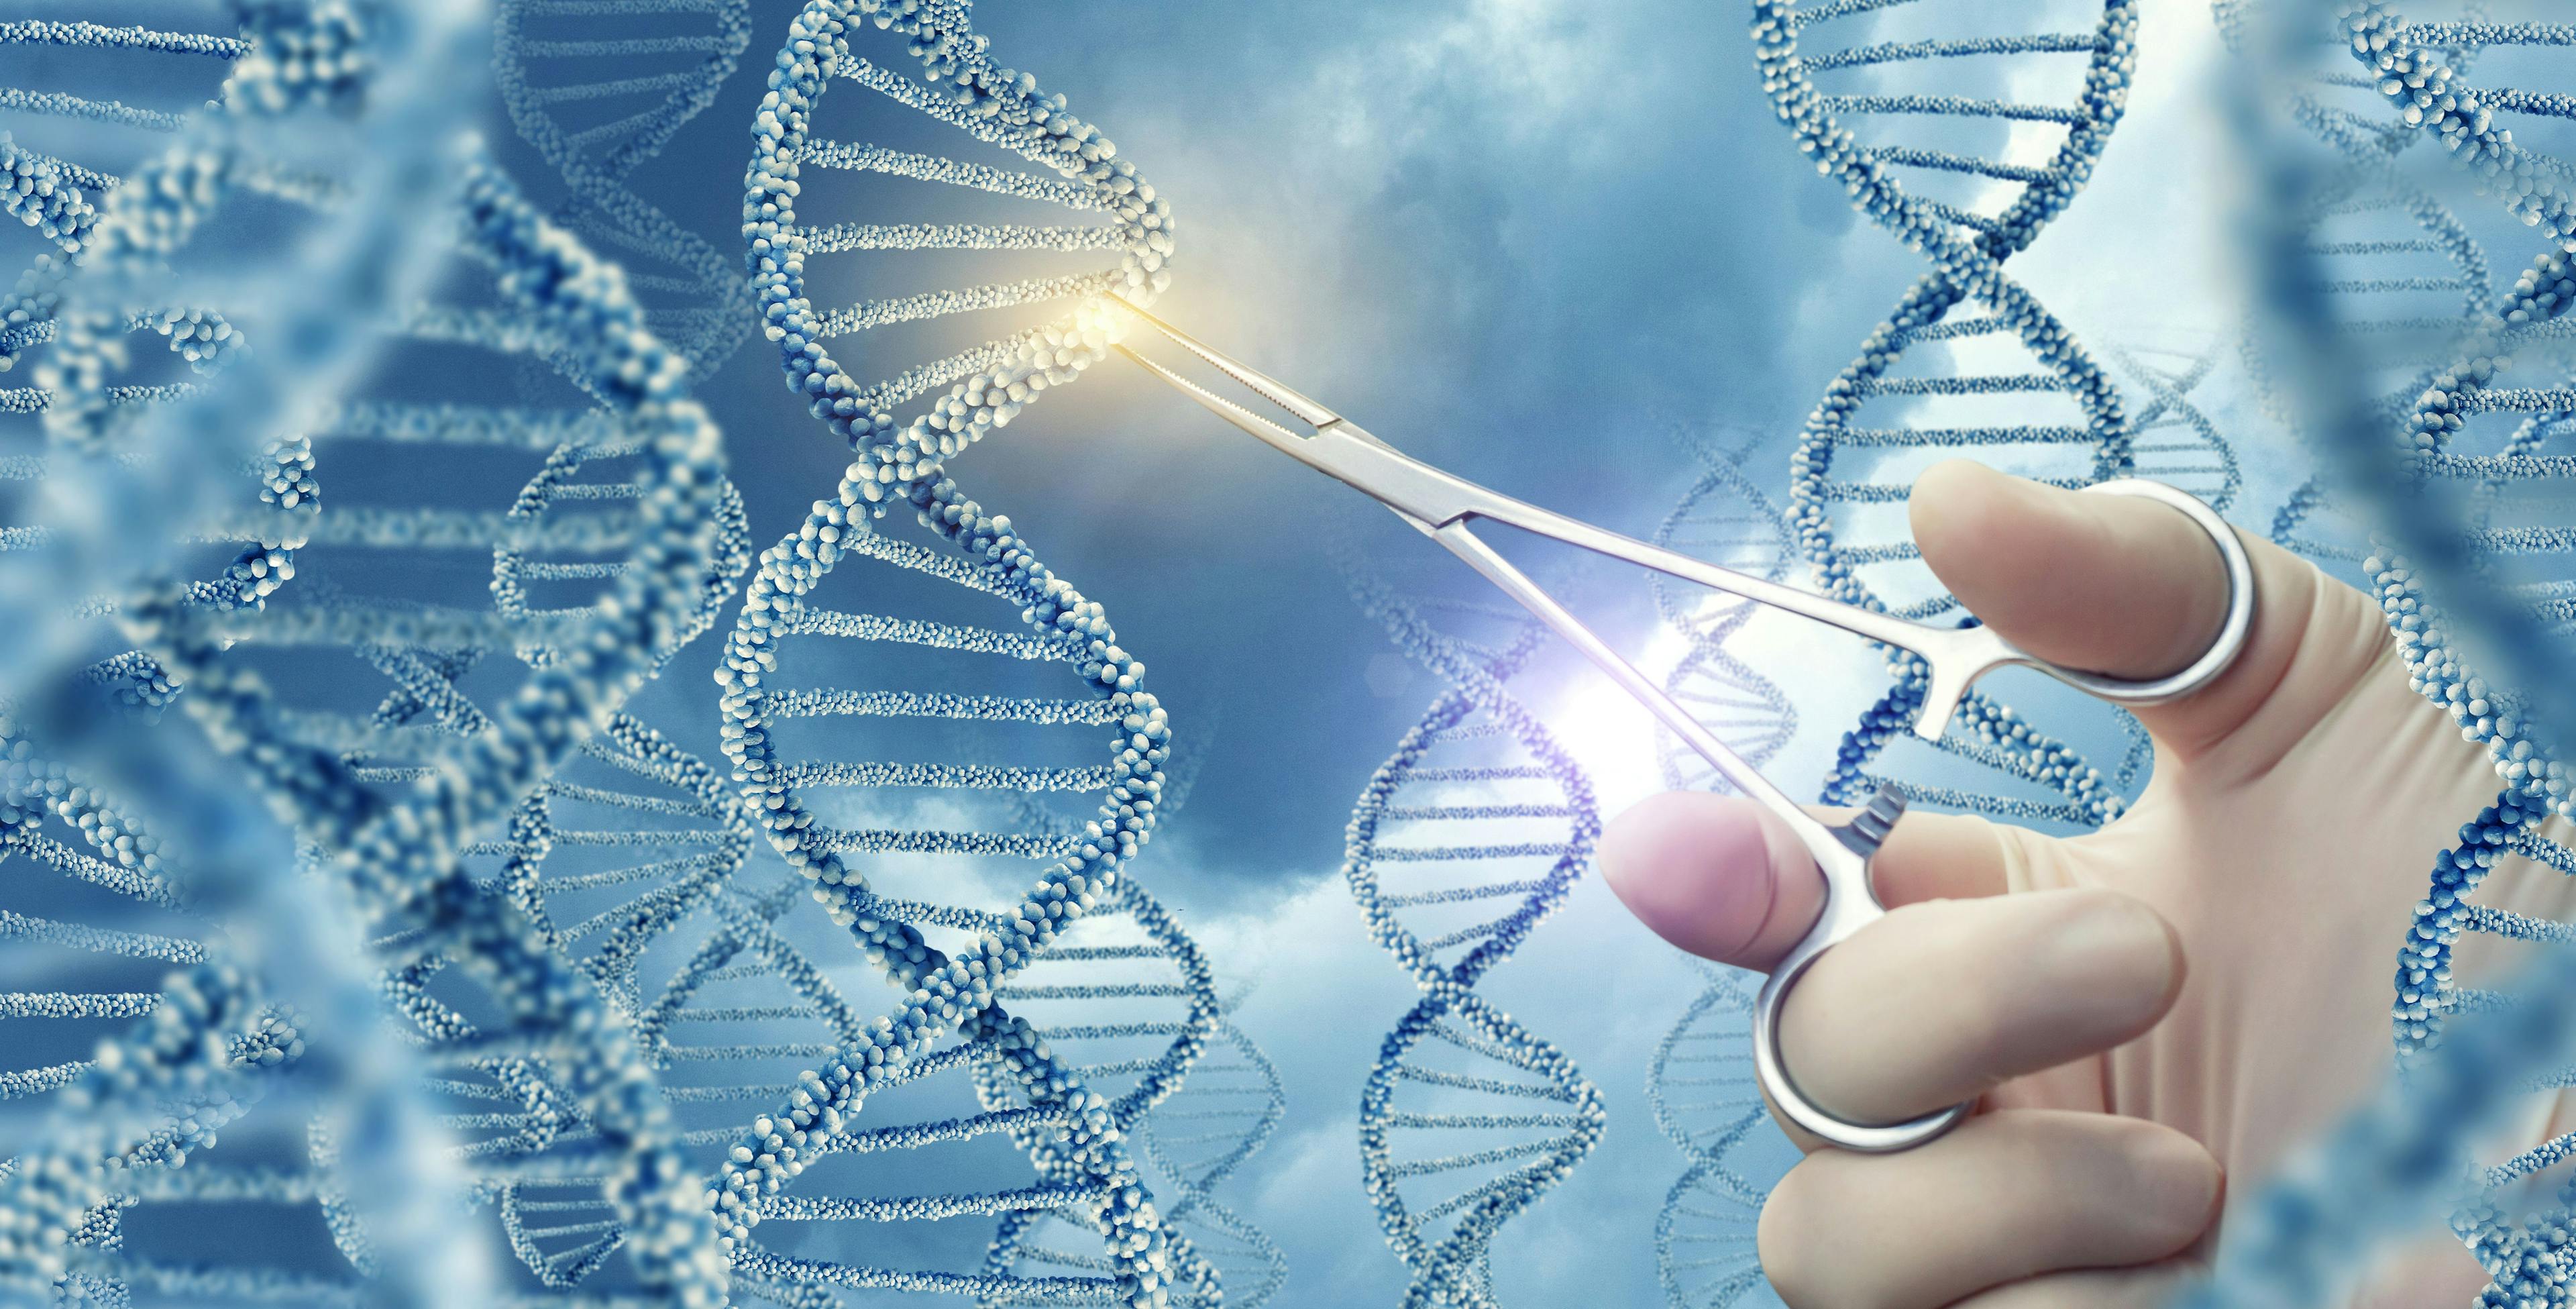 Prime Medicine Takes Precise Approach to Gene Editing With “Find and Replace” Technology 